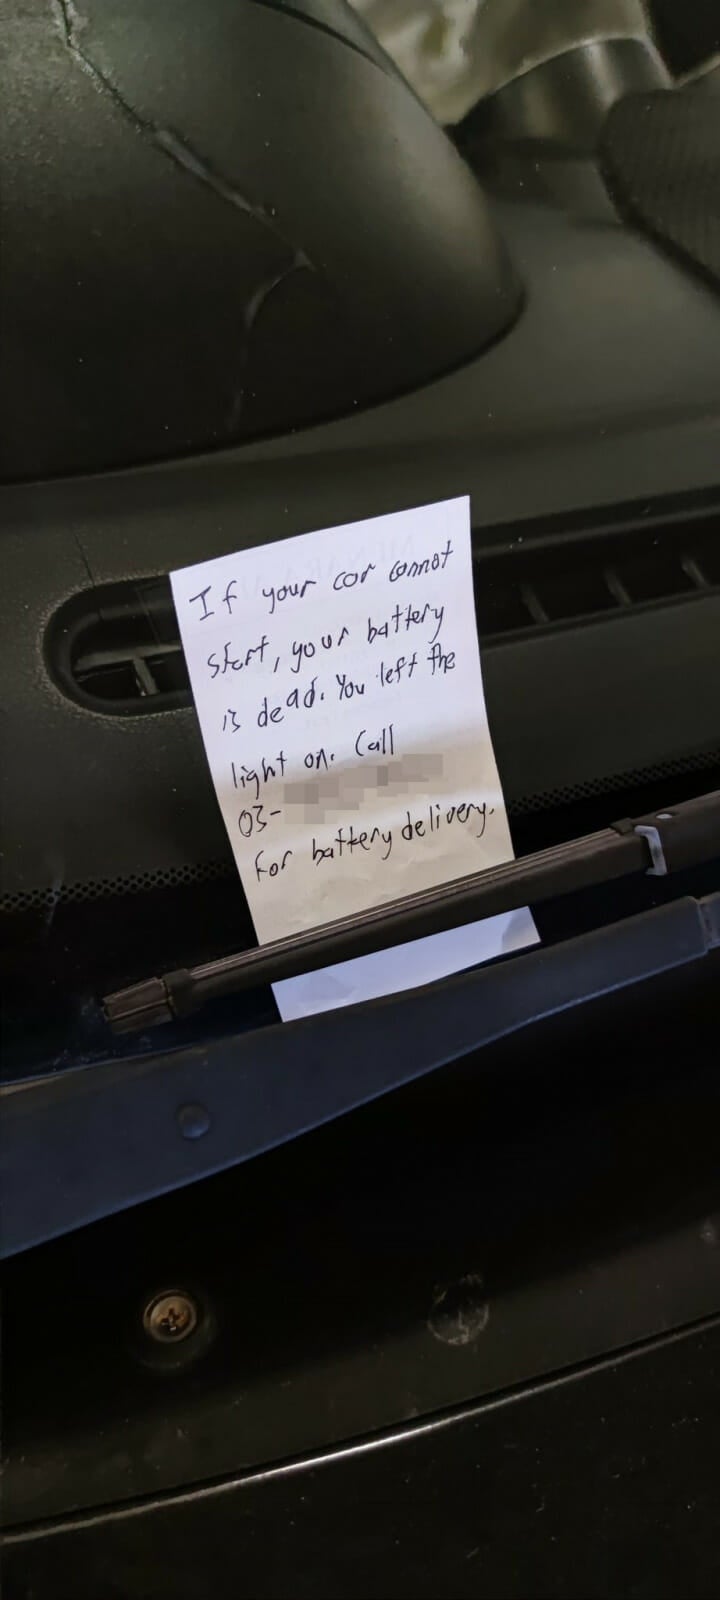 kind malaysian man leaves a note for driver forgot to turn off headlights battery delivery phone number 2